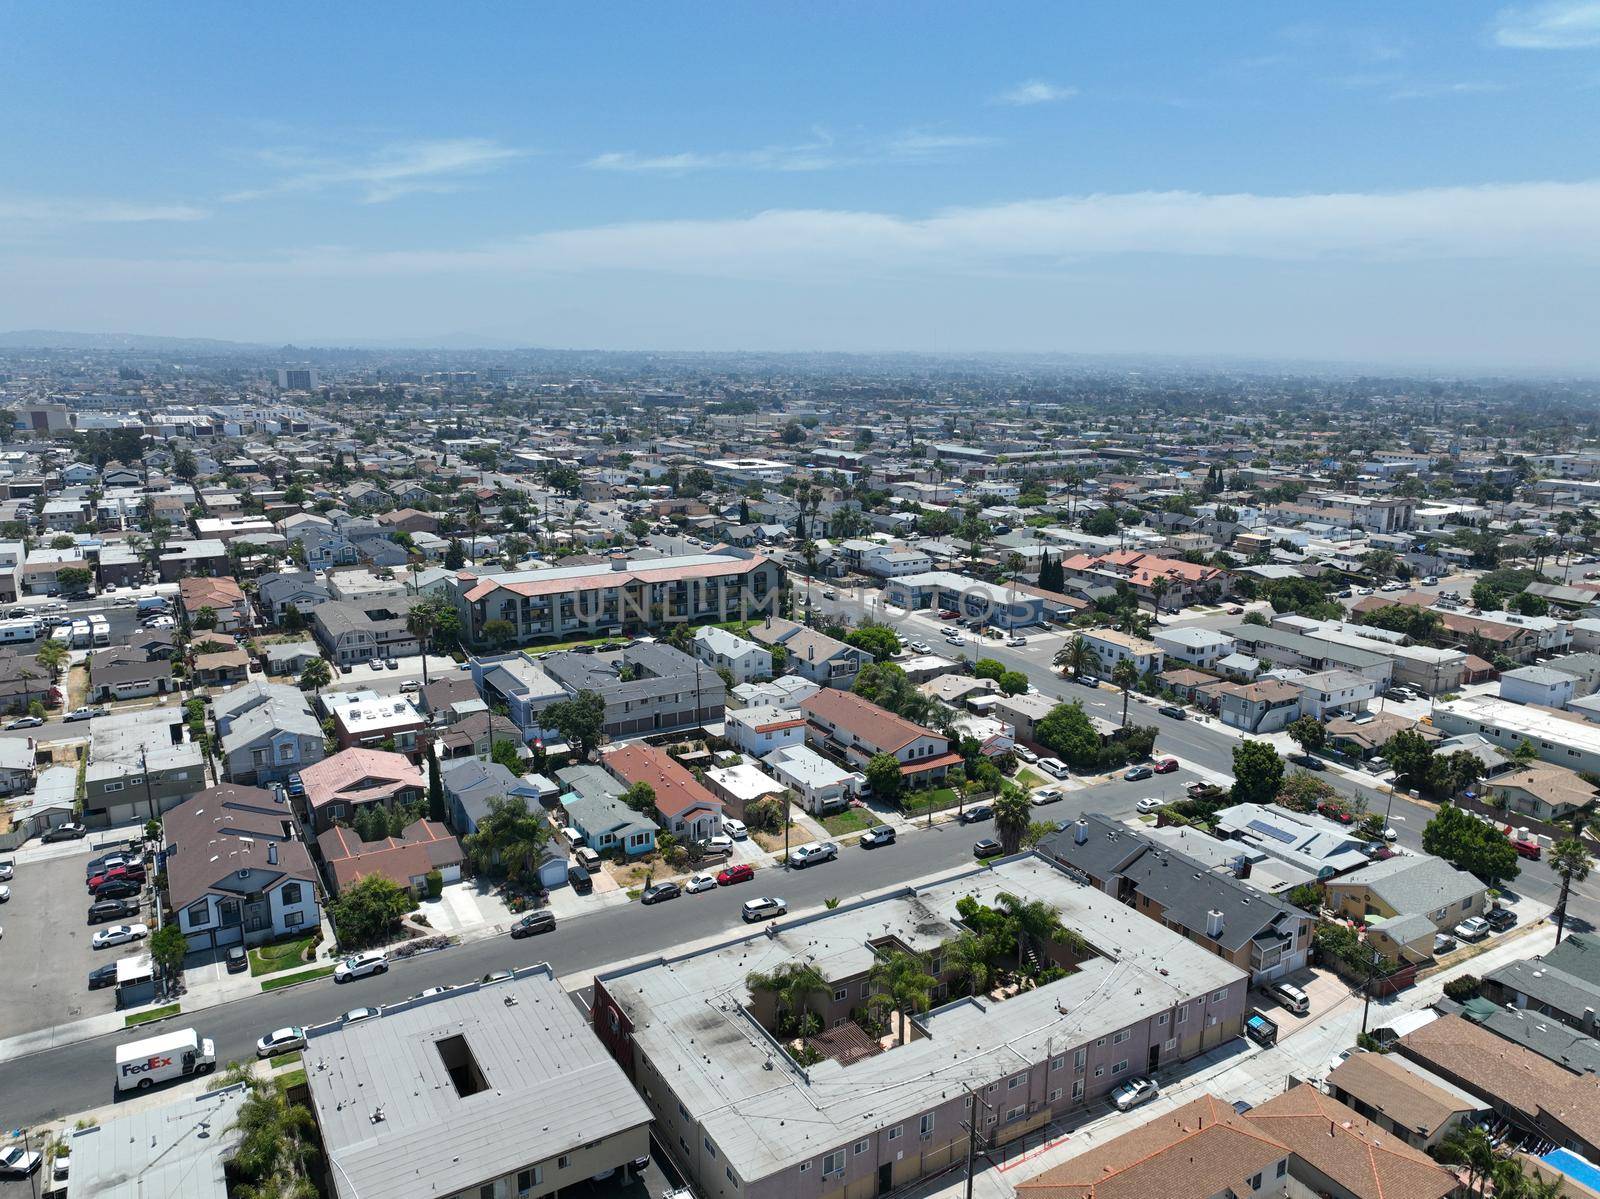 Aerial view of North Park neighborhood in San Diego, California, United States.